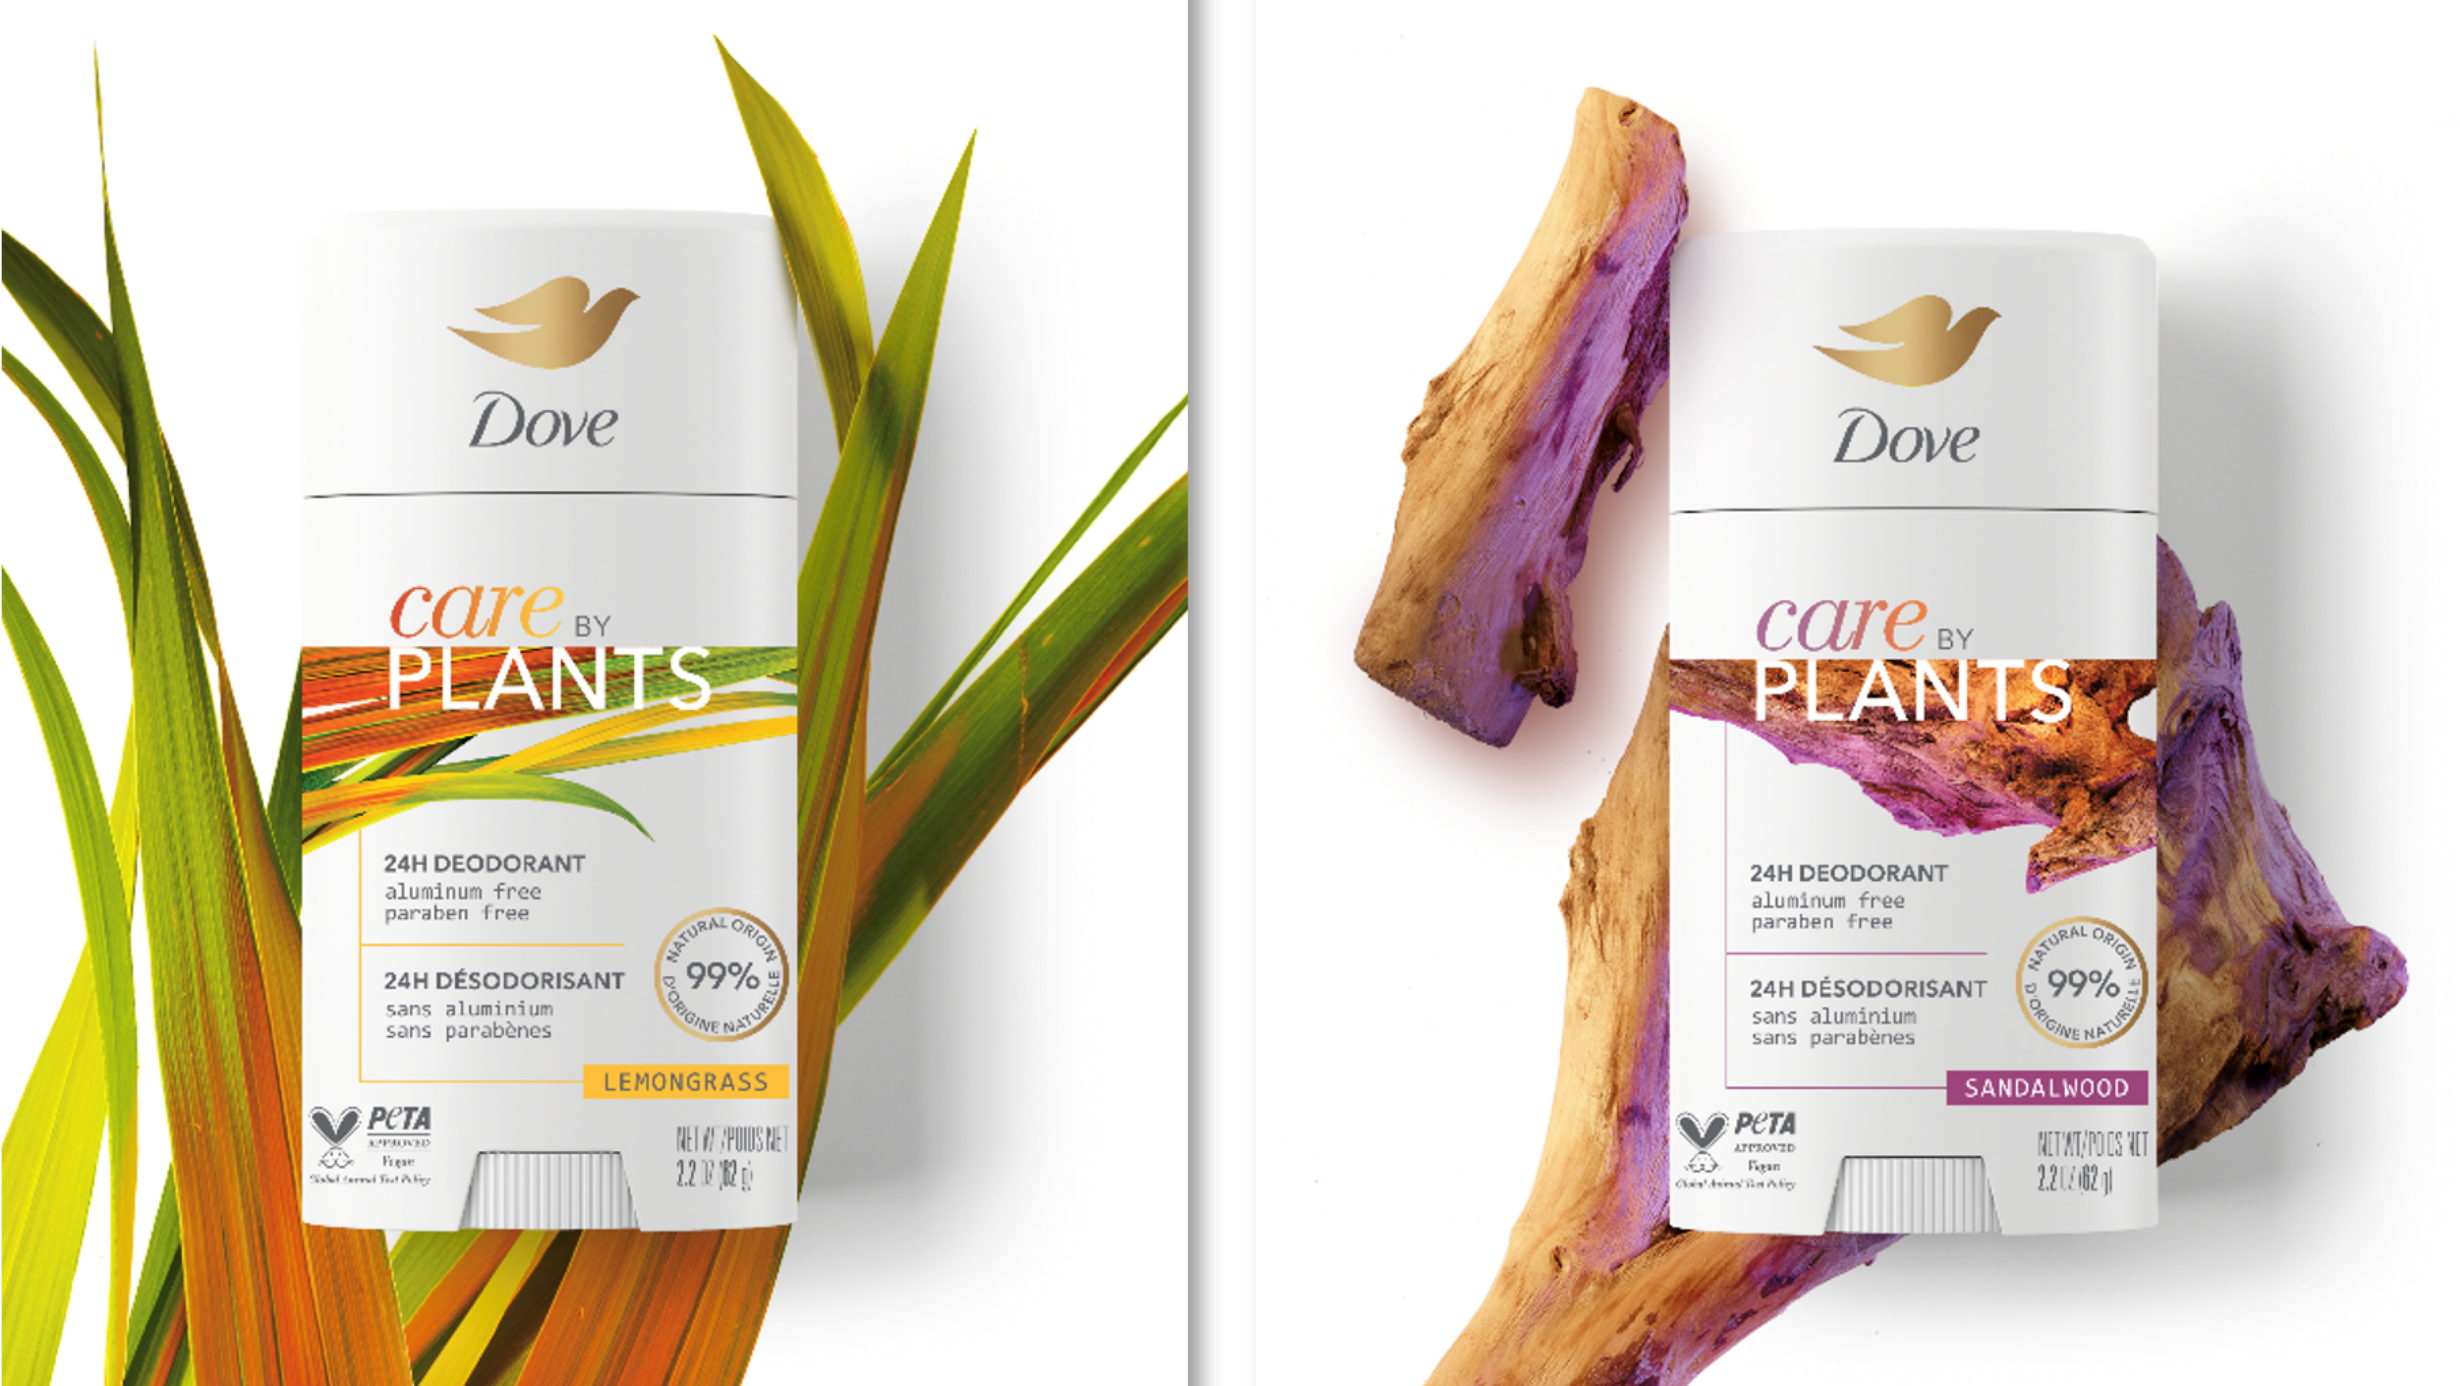 Dove's Newest Deodorant Line Is Natural, Vegan And Plant Based